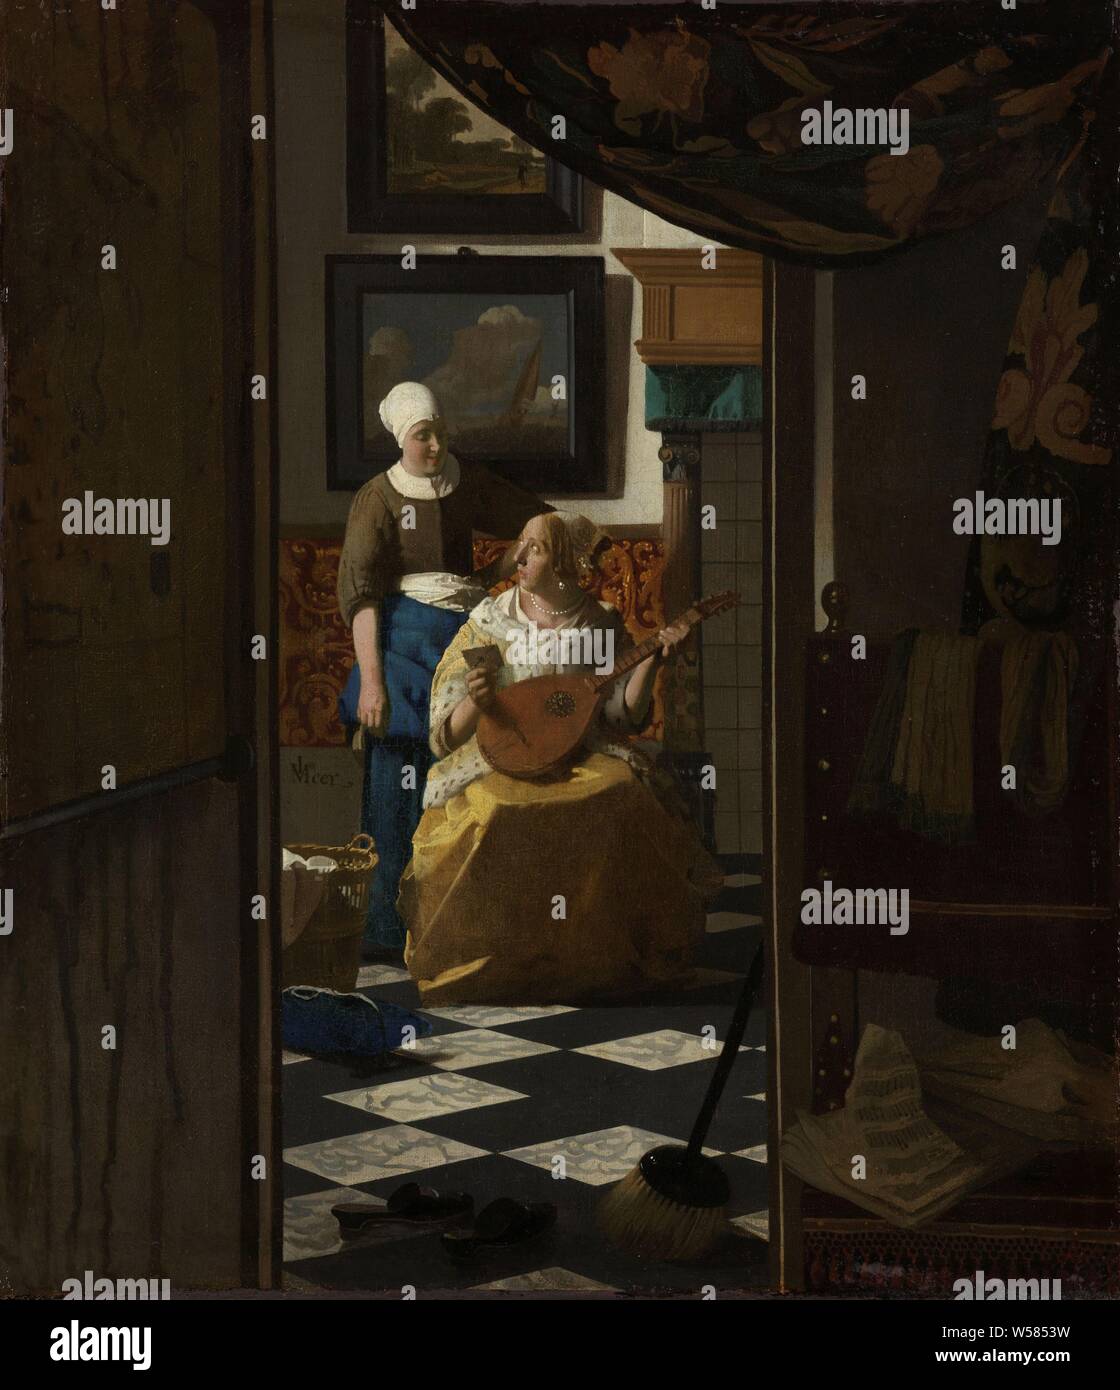 The Love Letter, Performance known as 'The love letter'. View through an  open door to an interior where a maid hands a letter to a young woman with  a lute on her